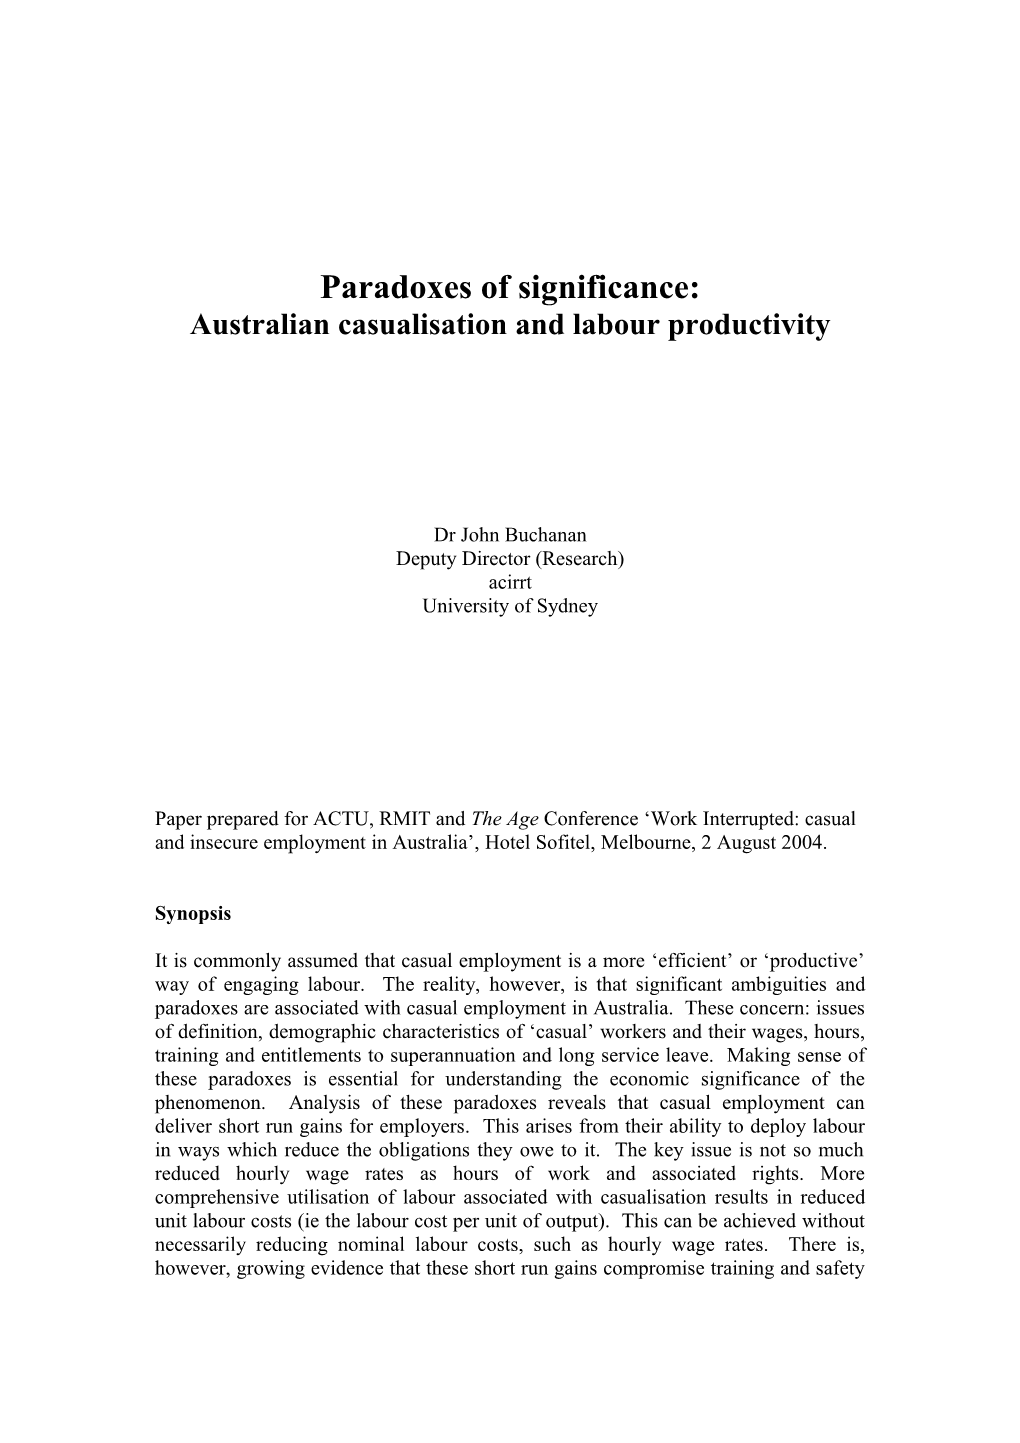 Paradoxes of Significance: Australian Casualisation and Labour Productivity